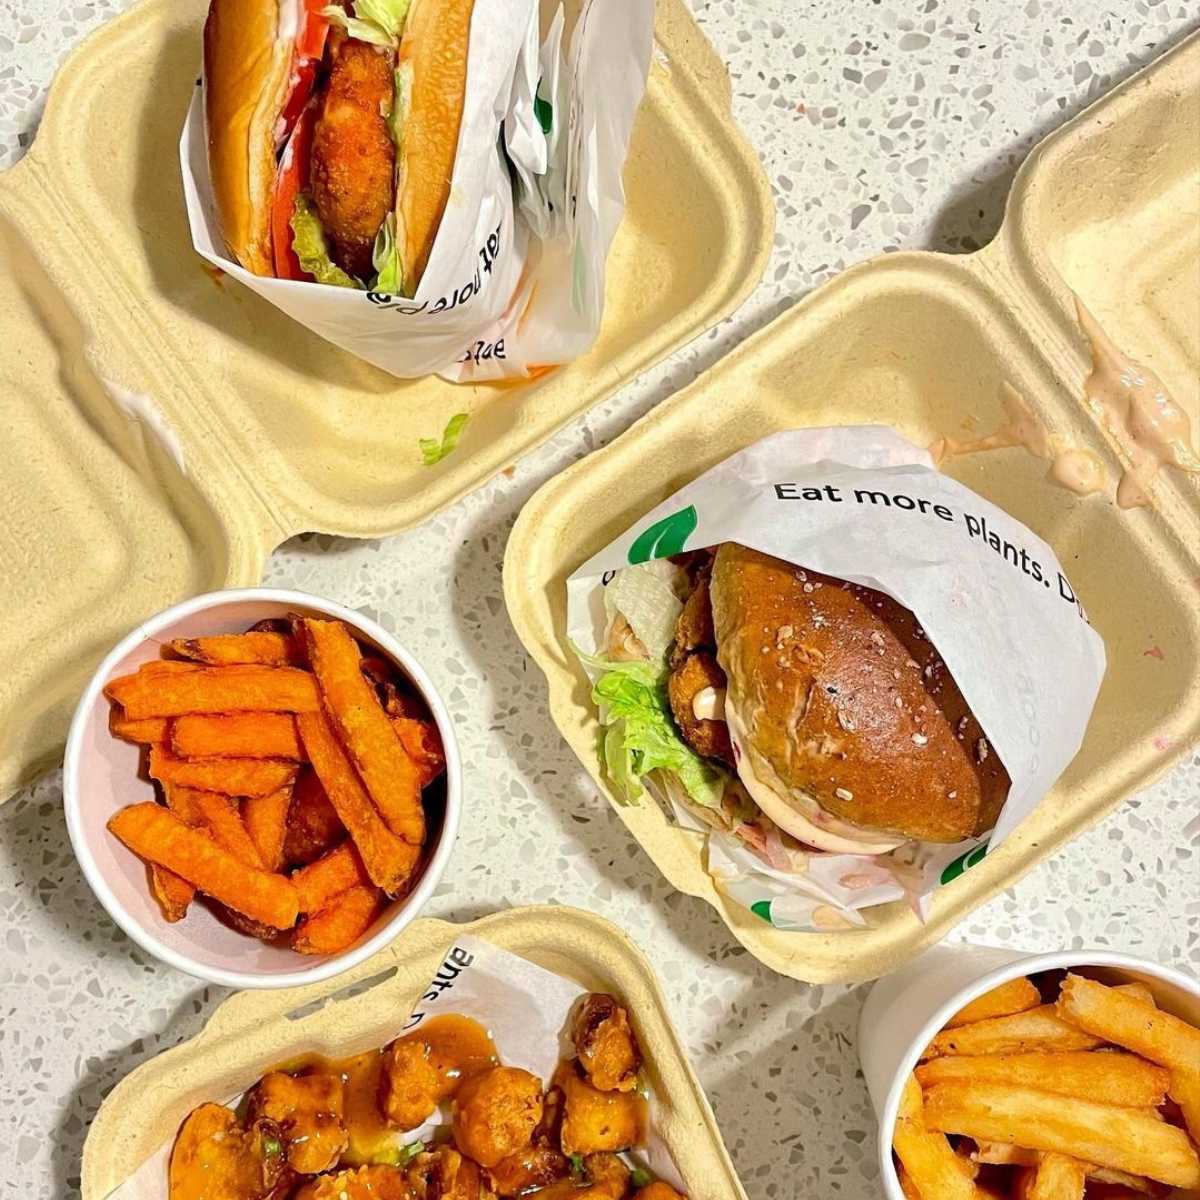 two vegan burgers and a selection of fast food sides